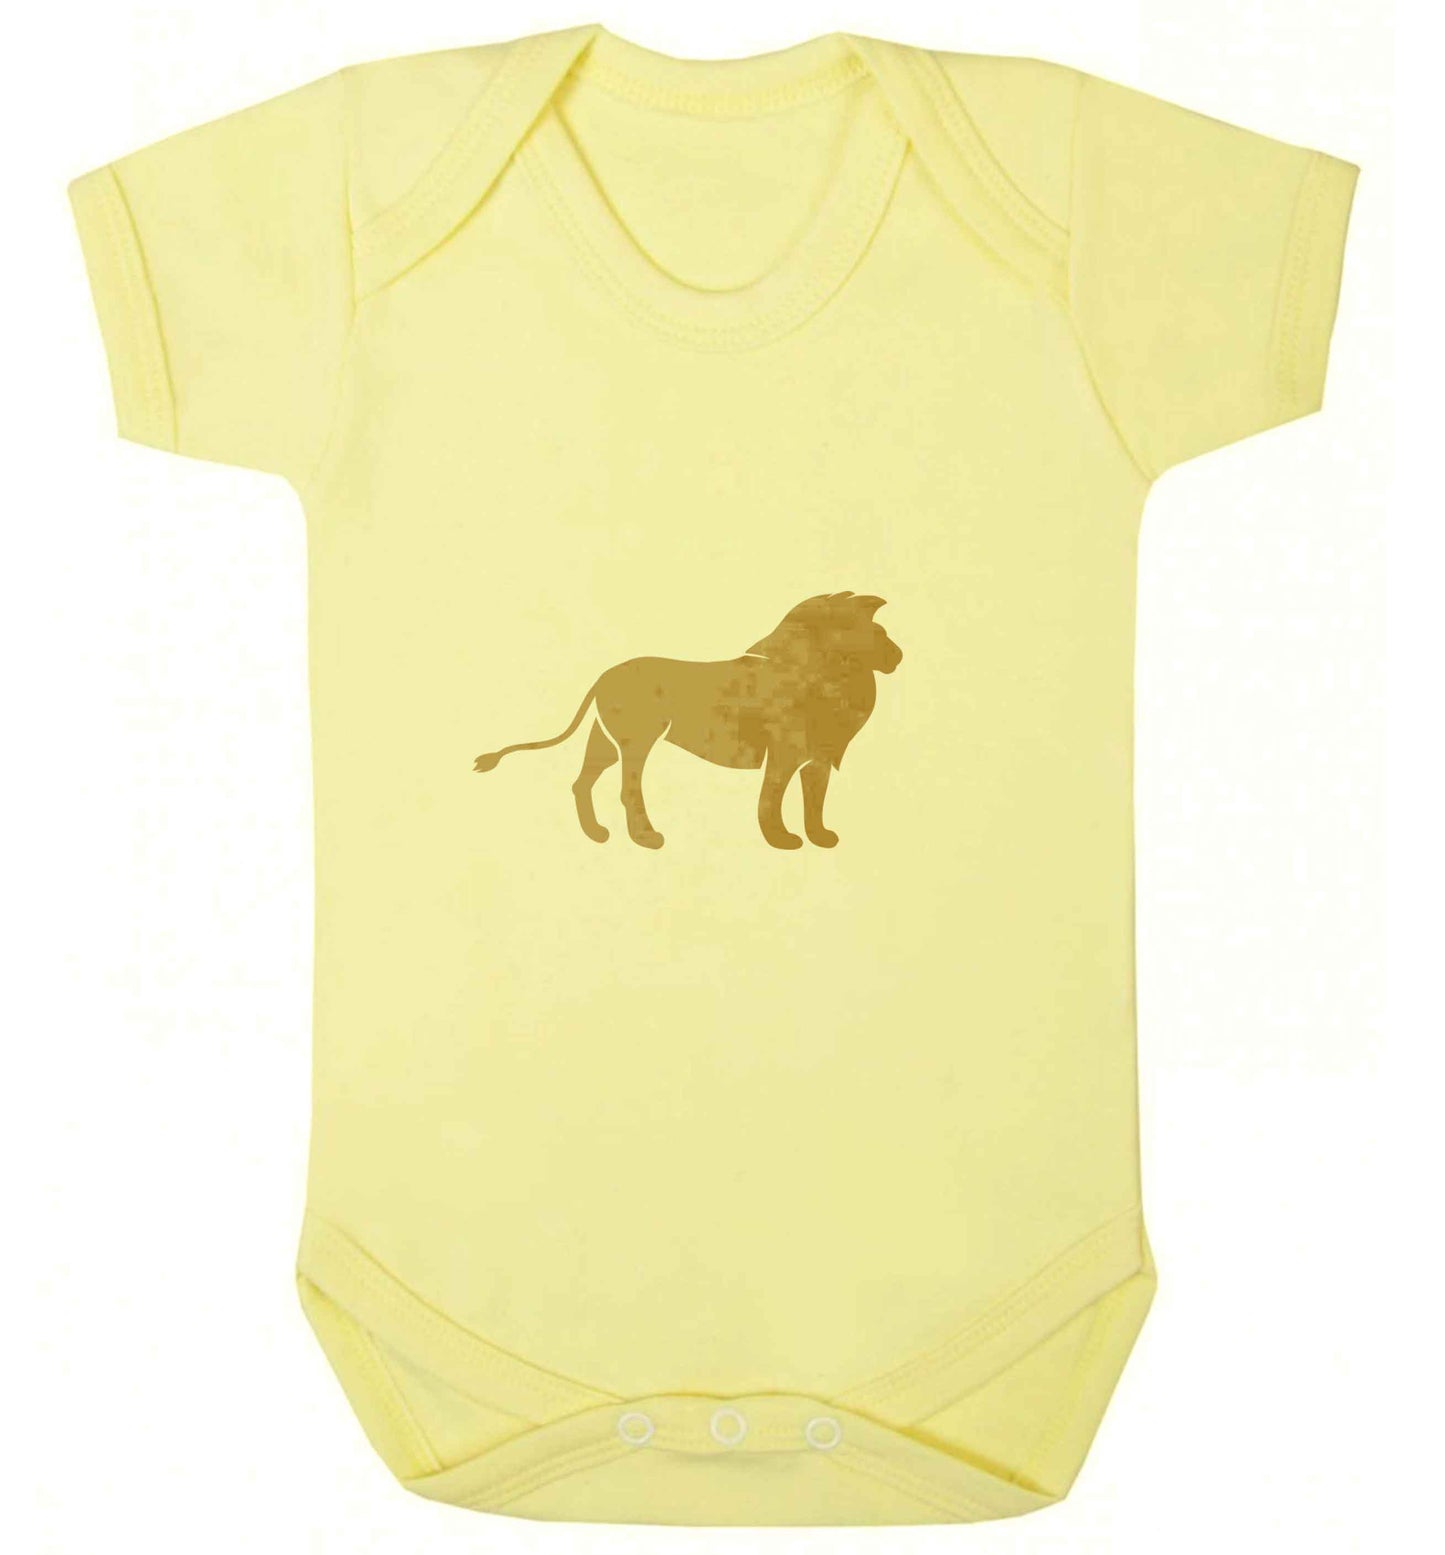 Gold lion baby vest pale yellow 18-24 months